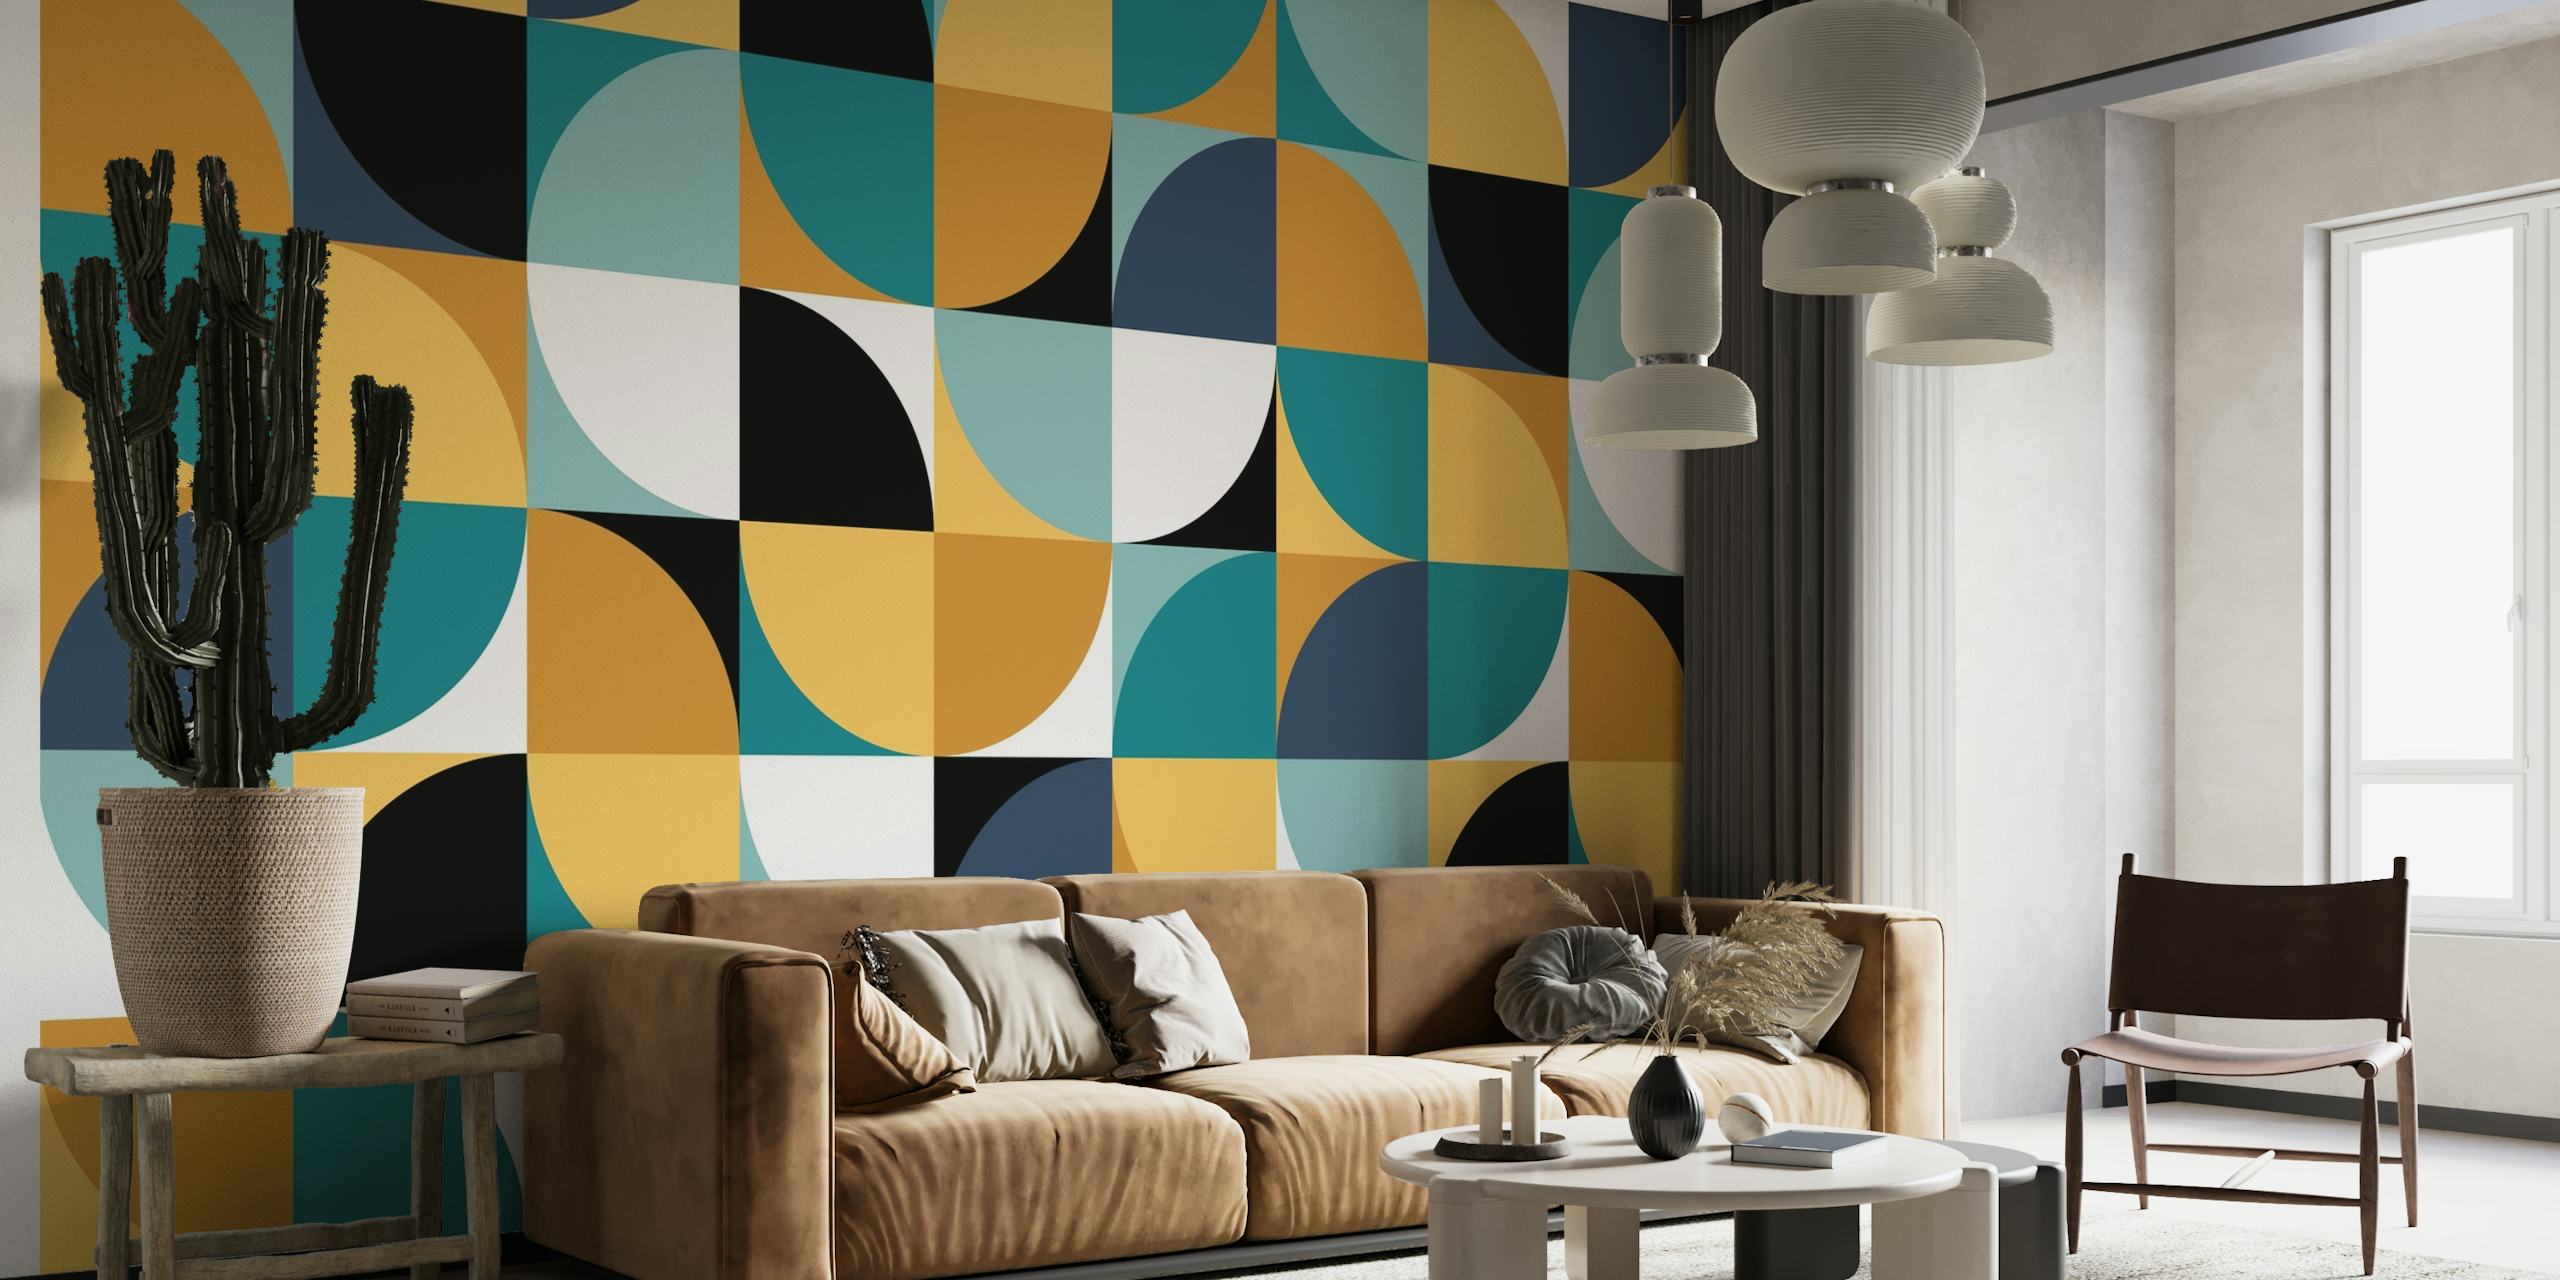 Geometric pattern wall mural with a retro design of squares and circles in shades of blue, tan, and black